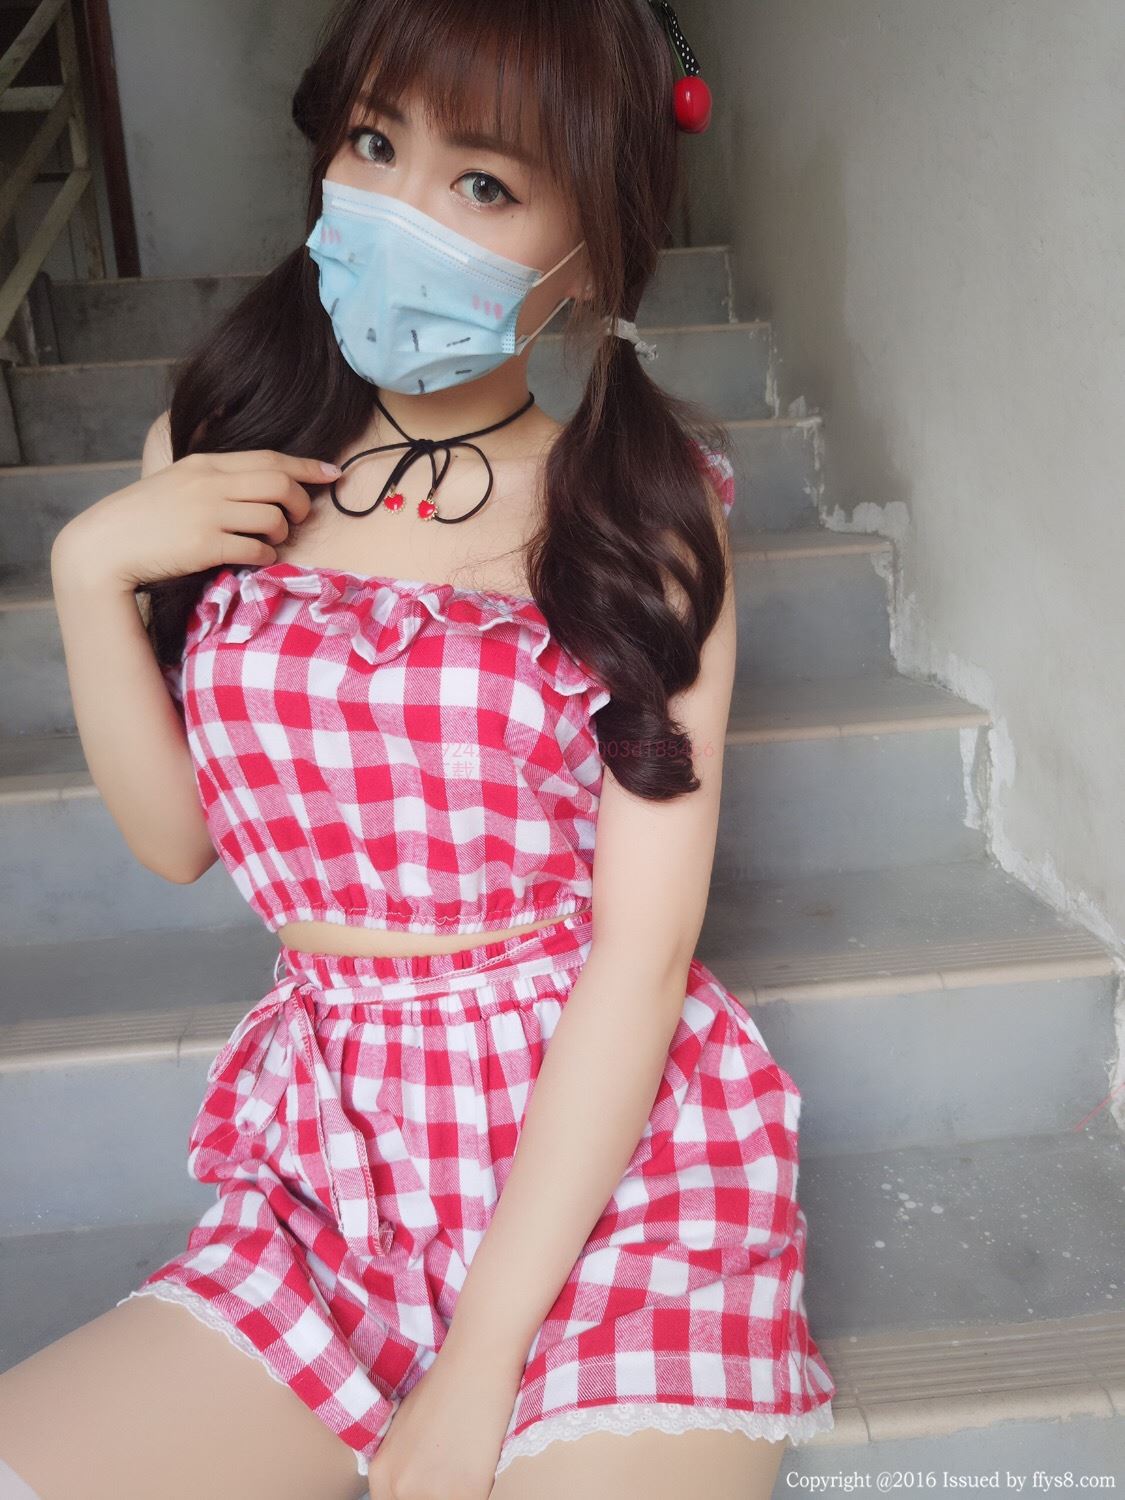 Cottontail rabbit a few 170630 red and white check dress(1)